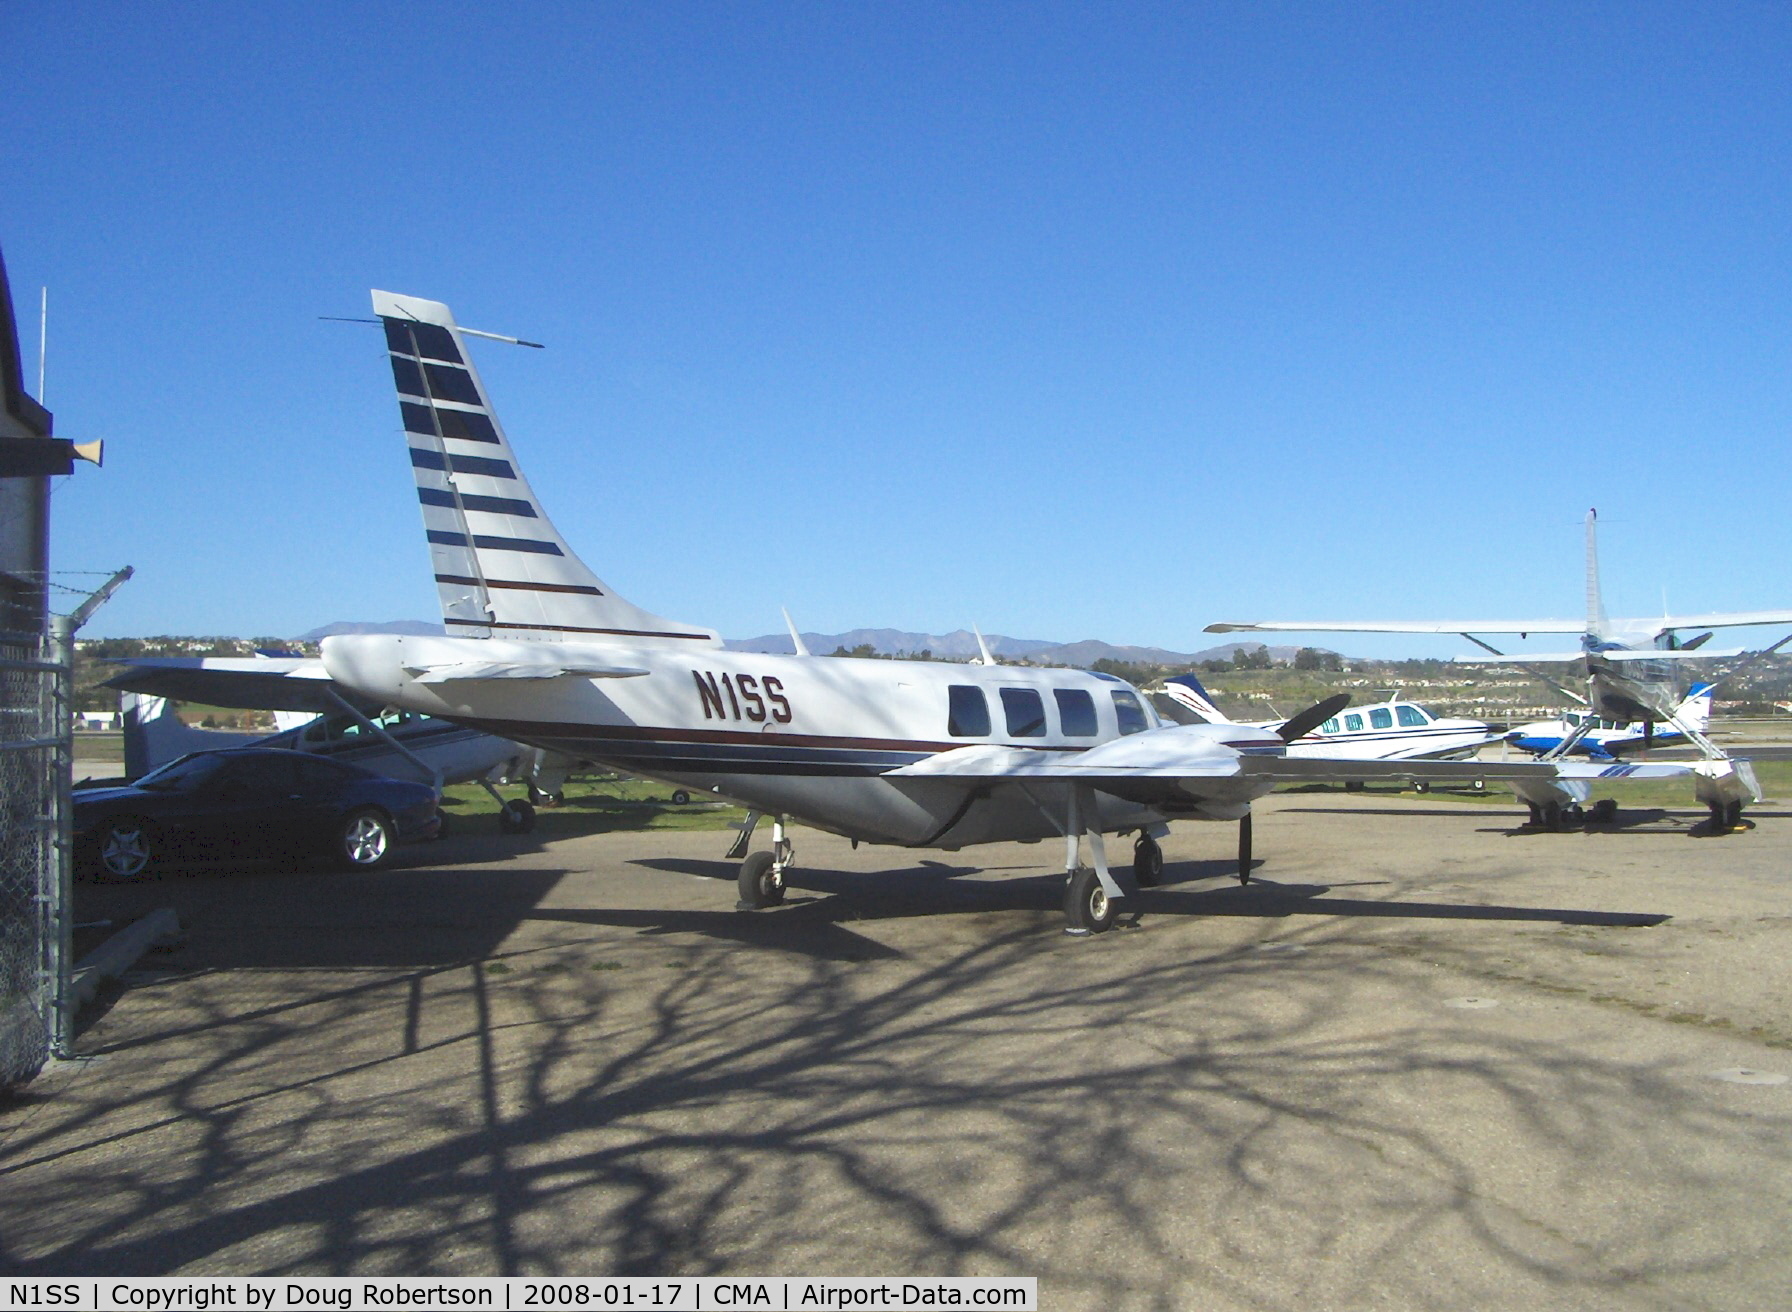 N1SS, 1979 Piper Aerostar601P C/N 61P06947963331, 1979 Piper PA-60-601P AEROSTAR, two Lycoming IO-540-S1A5 290 Hp each, high flow rate turbochargers supply bleed air for cabin pressurization